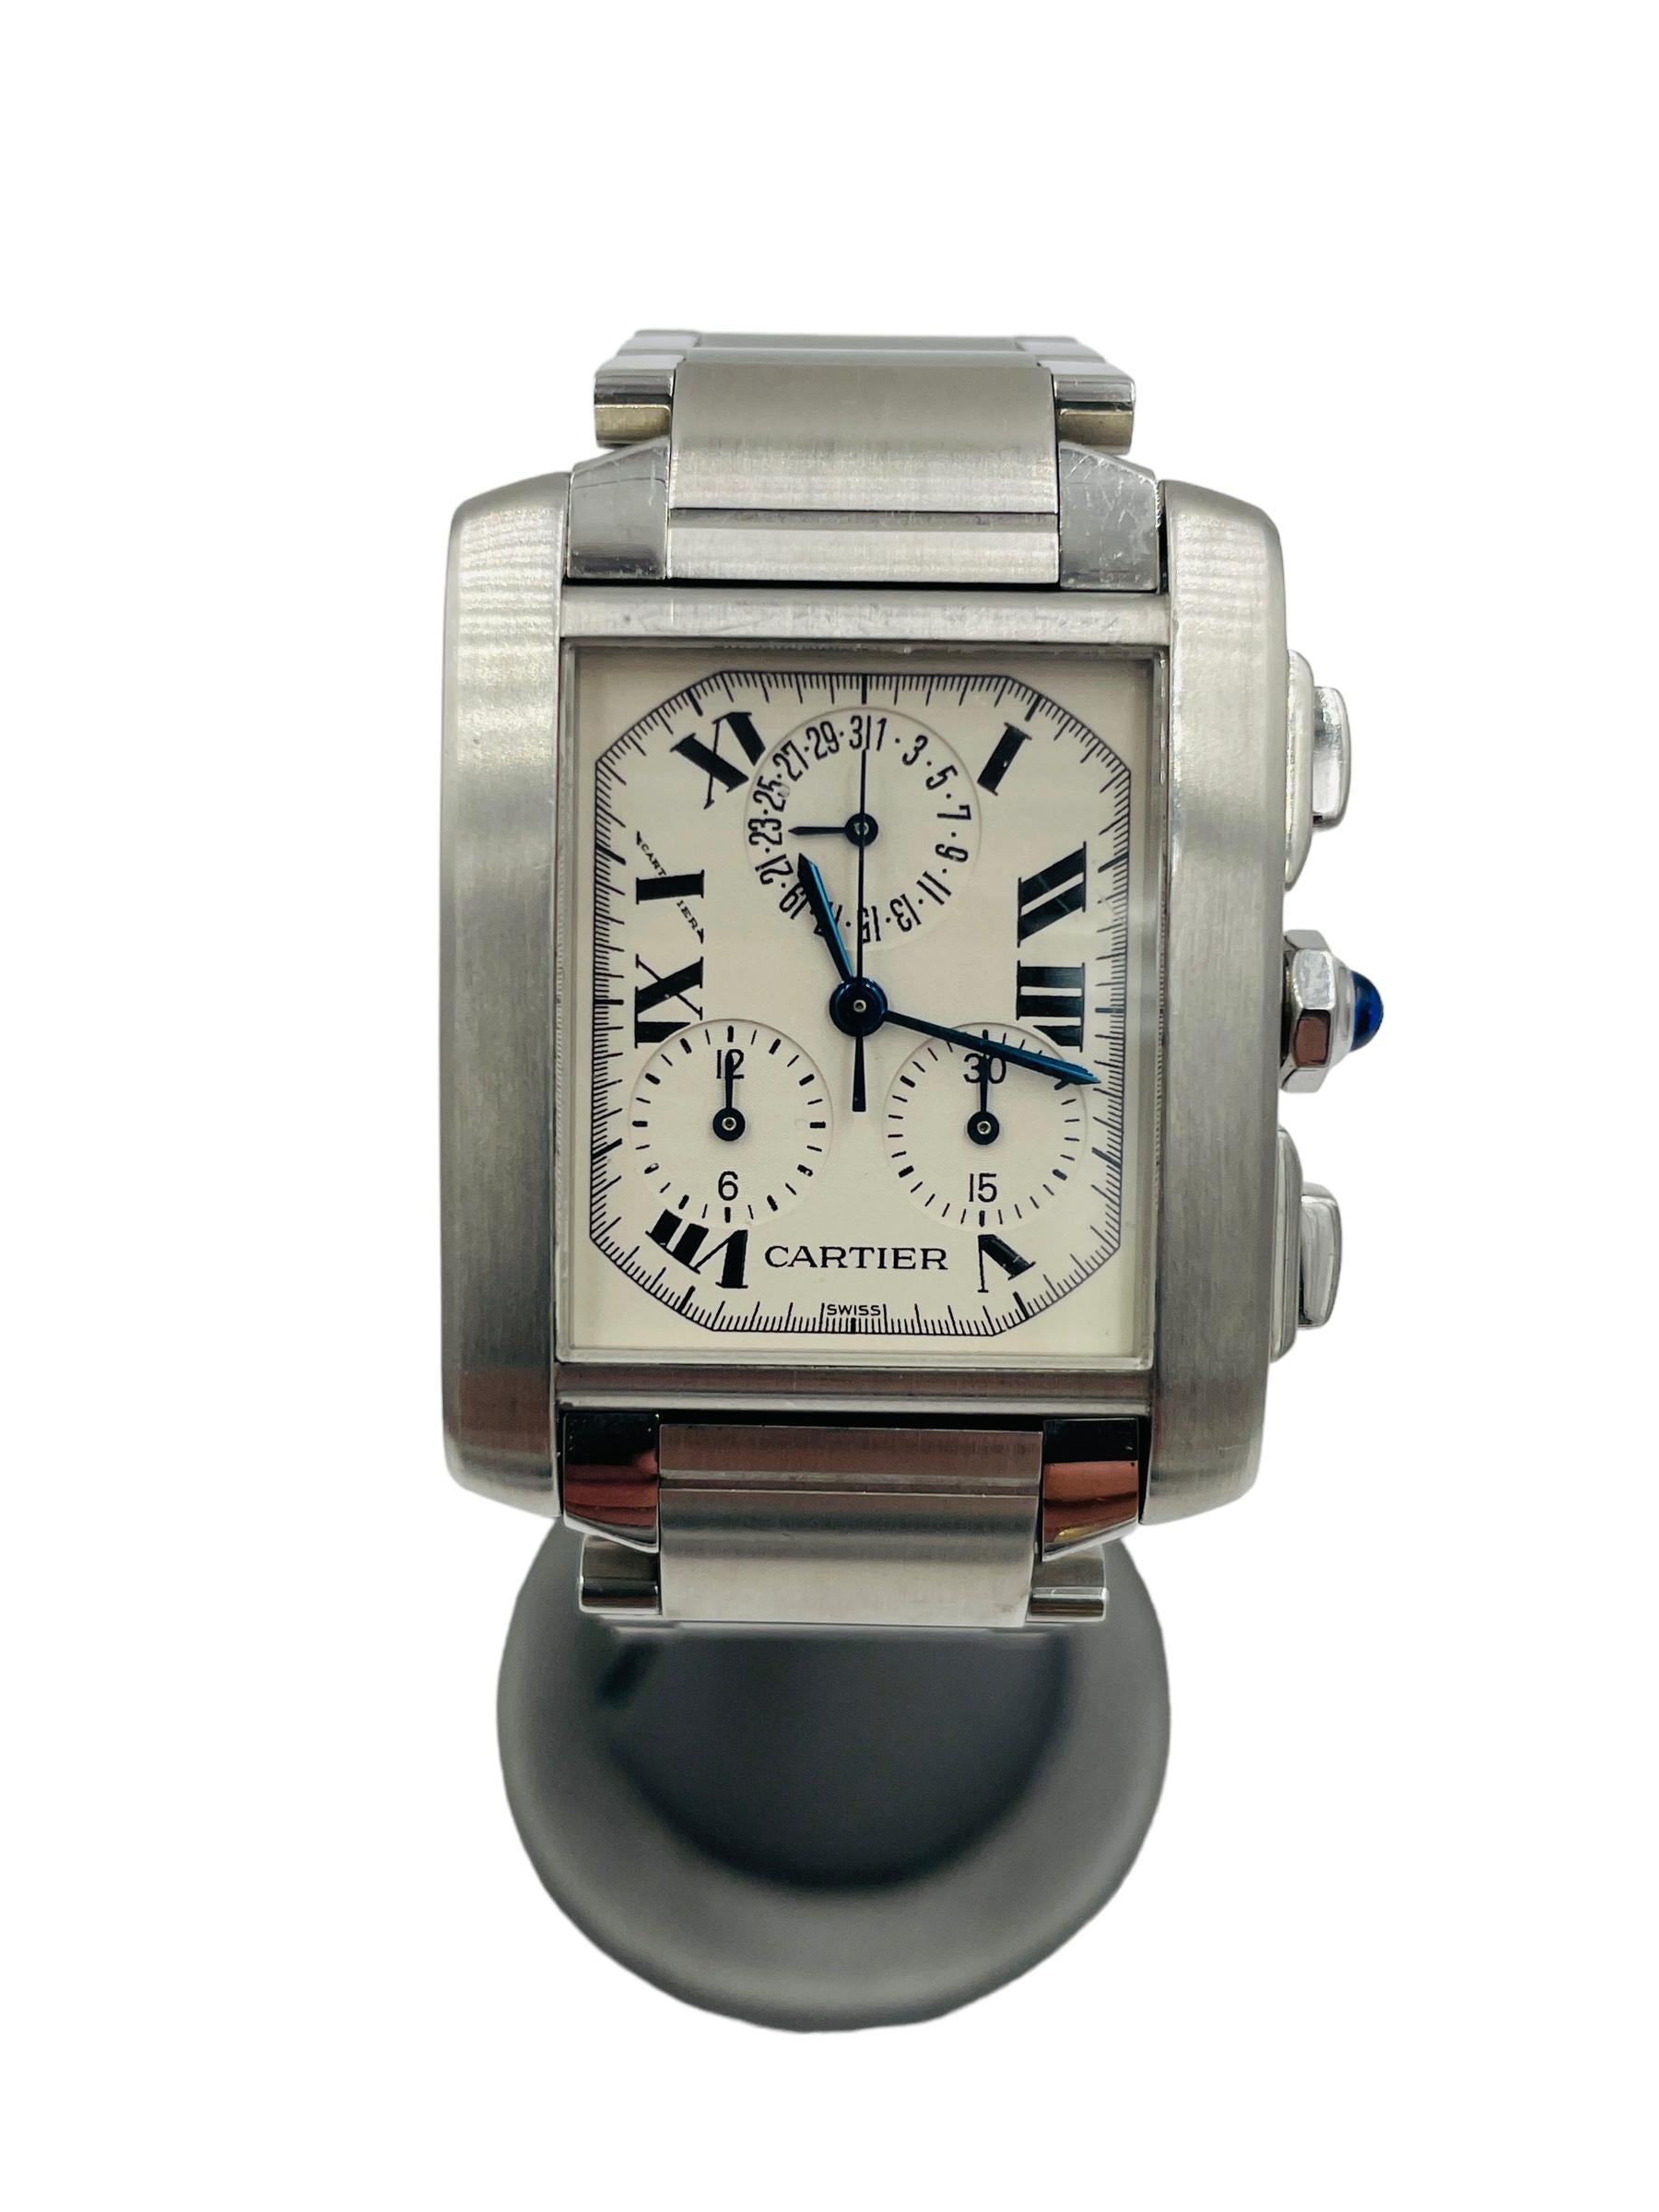 Cartier 2303 Tank Francaise Chronoflex Quartz Men’s Large WristWatch

SPECIFICATIONS:  Cartier Chronoflex quartz large men's watch Ref 2303.  This watch is in minty condition, case size 28mm by 36mm, and will fit up to 7